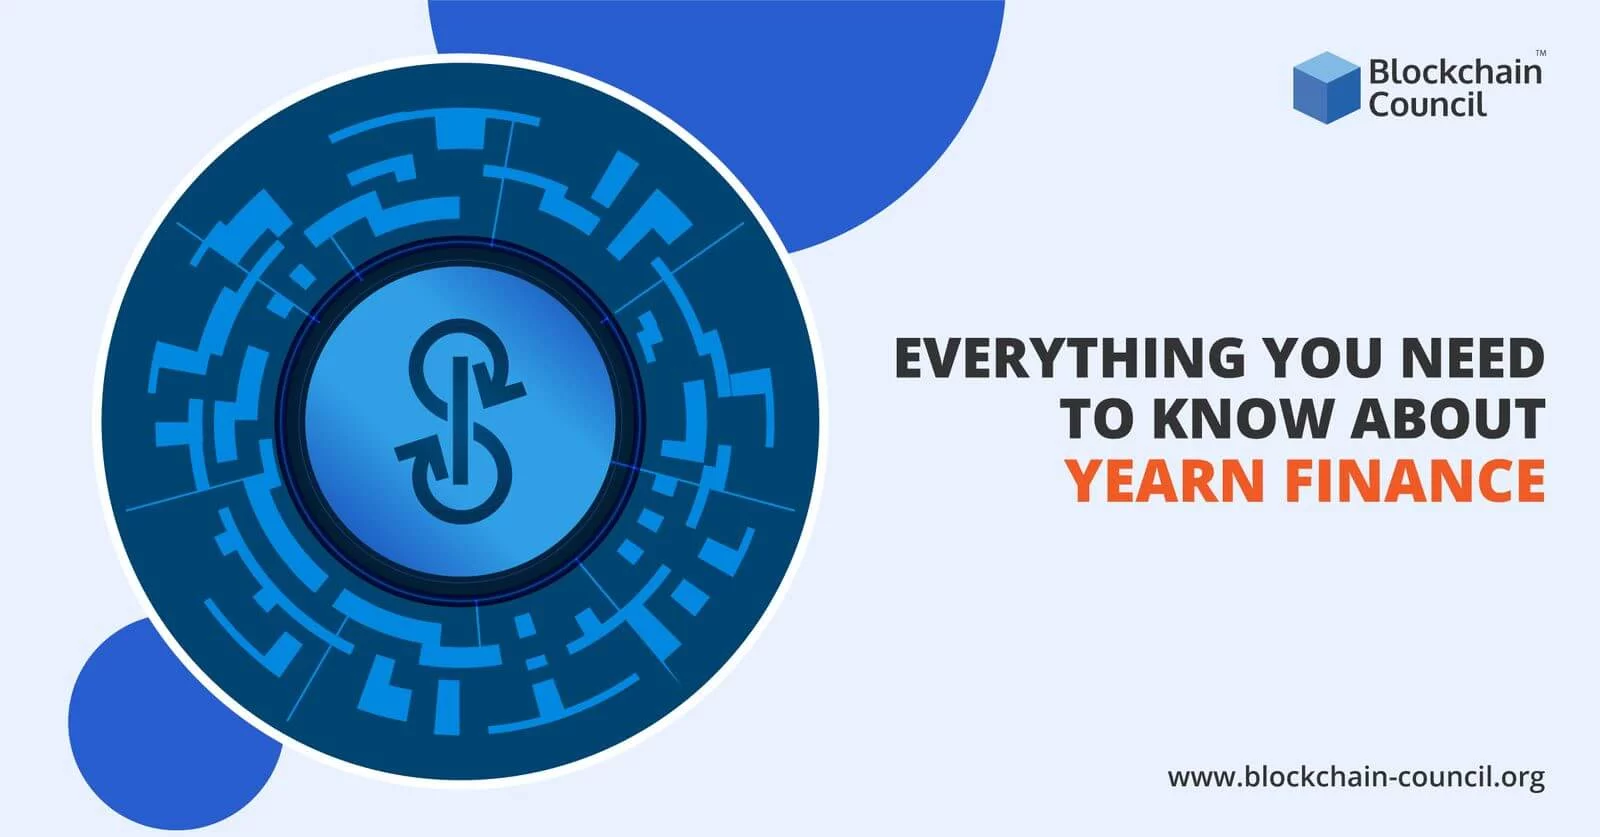 Everything You Need to Know About Yearn Finance